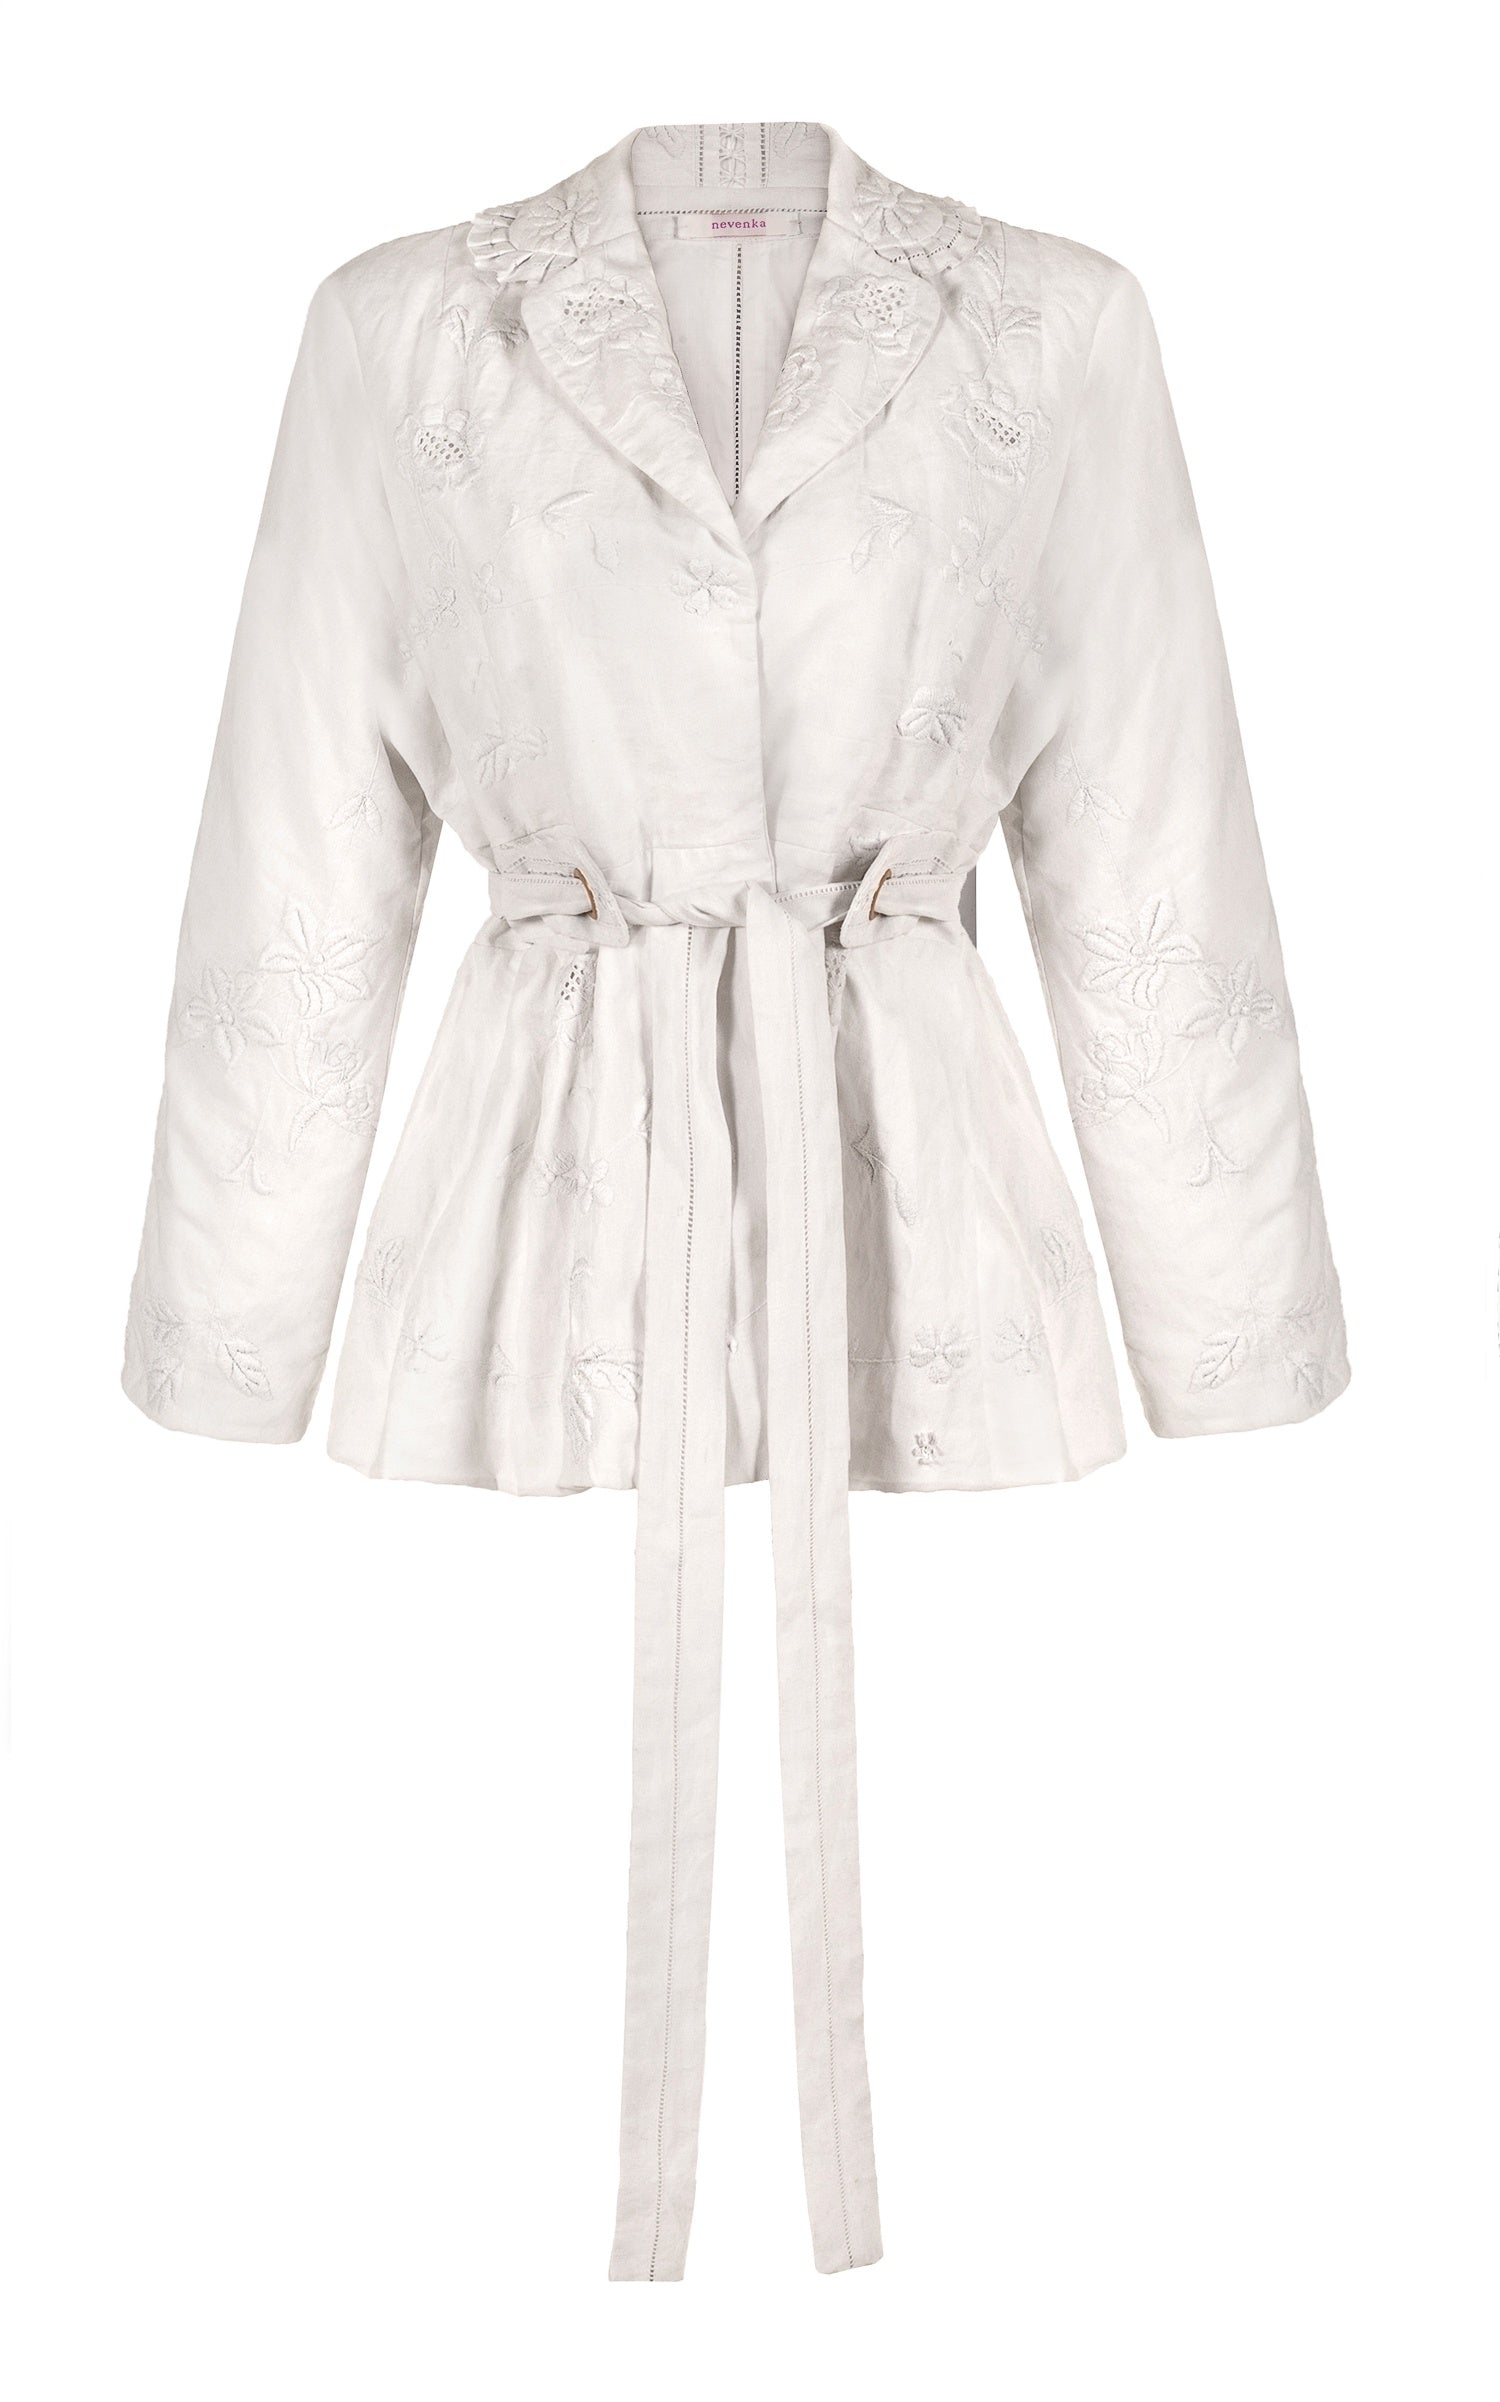 let it rain down on me white embroidery jacket